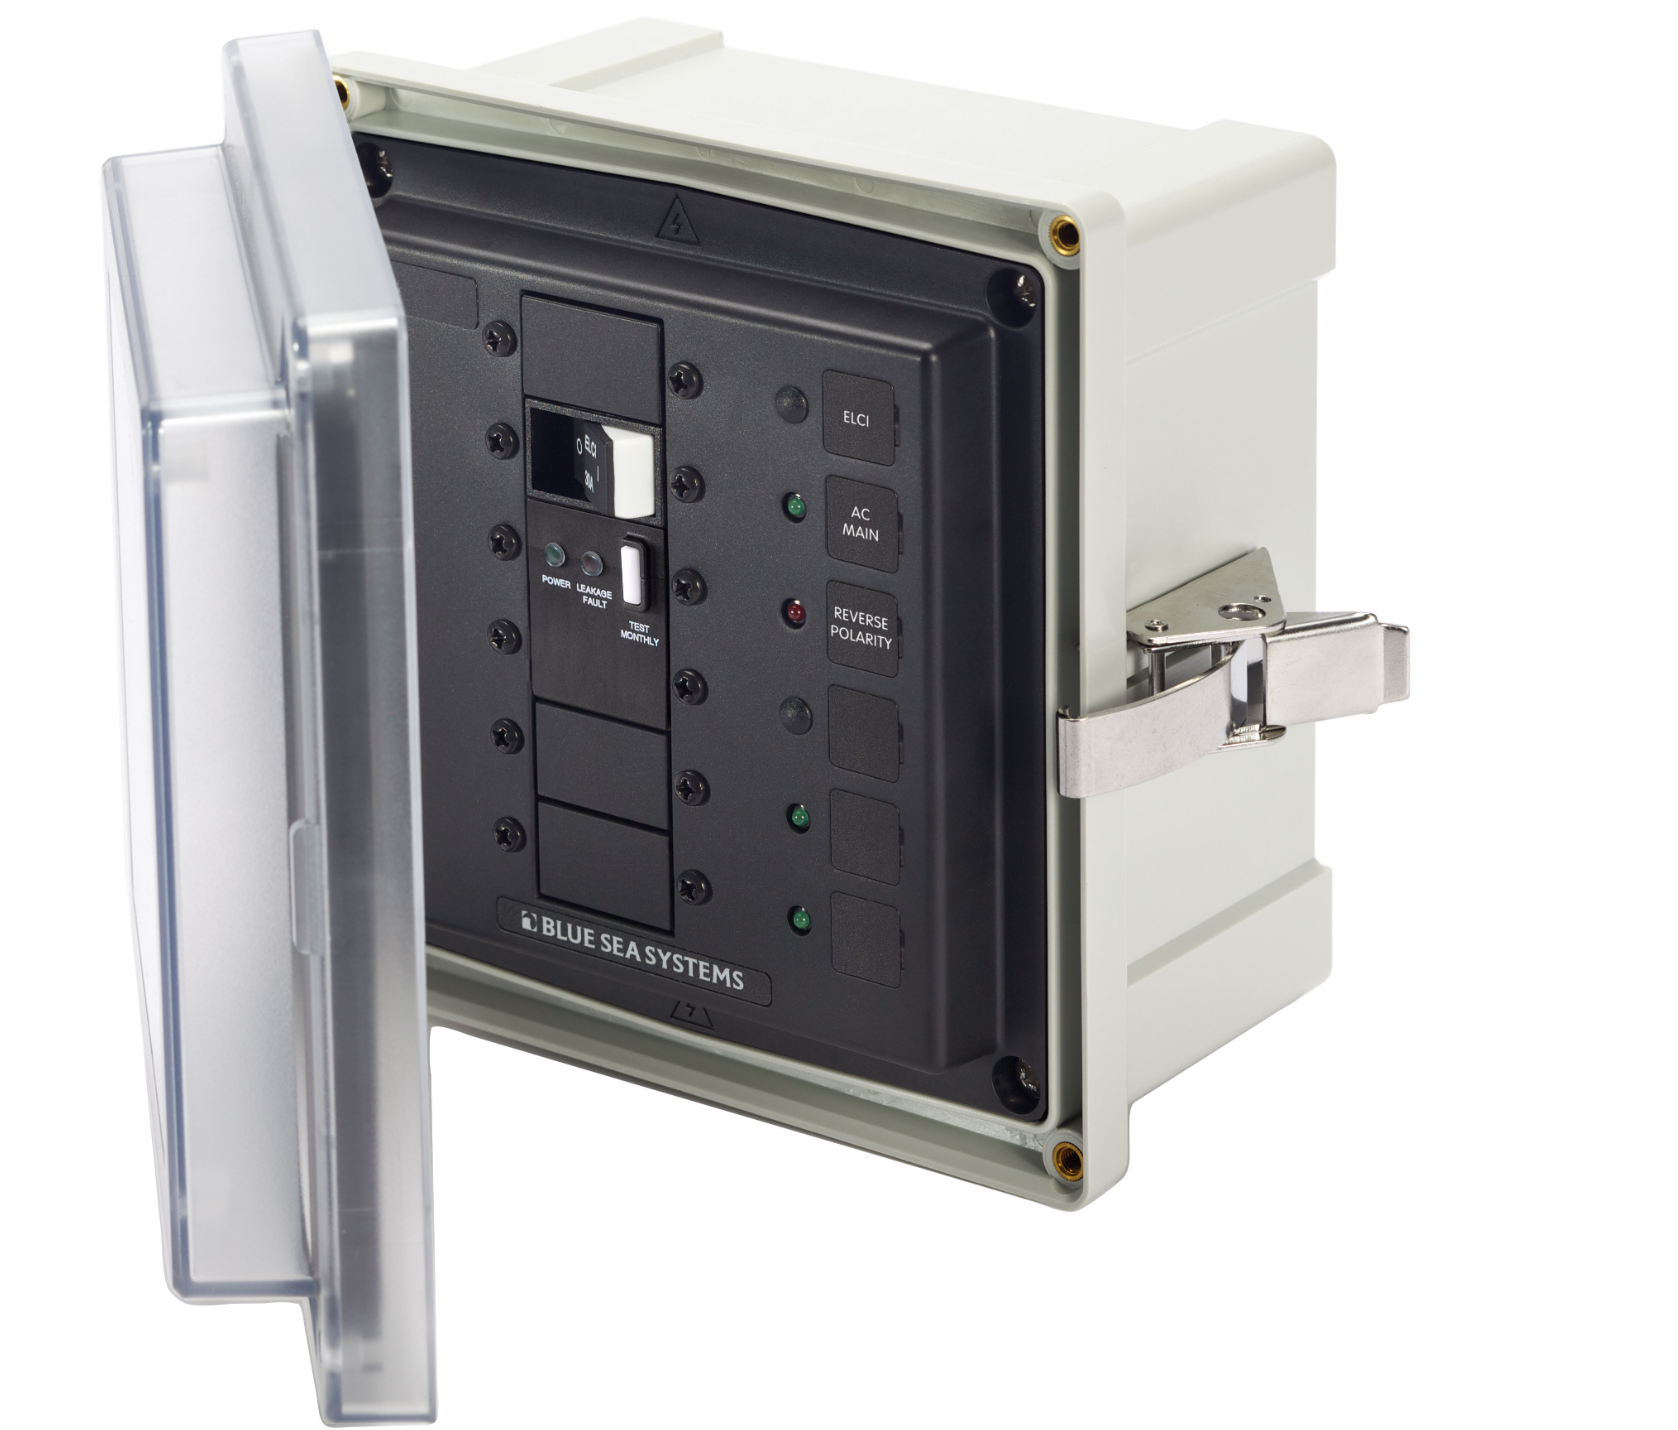 SMS Surface Mount System Panel Enclosure - 120V AC / 50A ELCI Main - 2 blank circuit positions